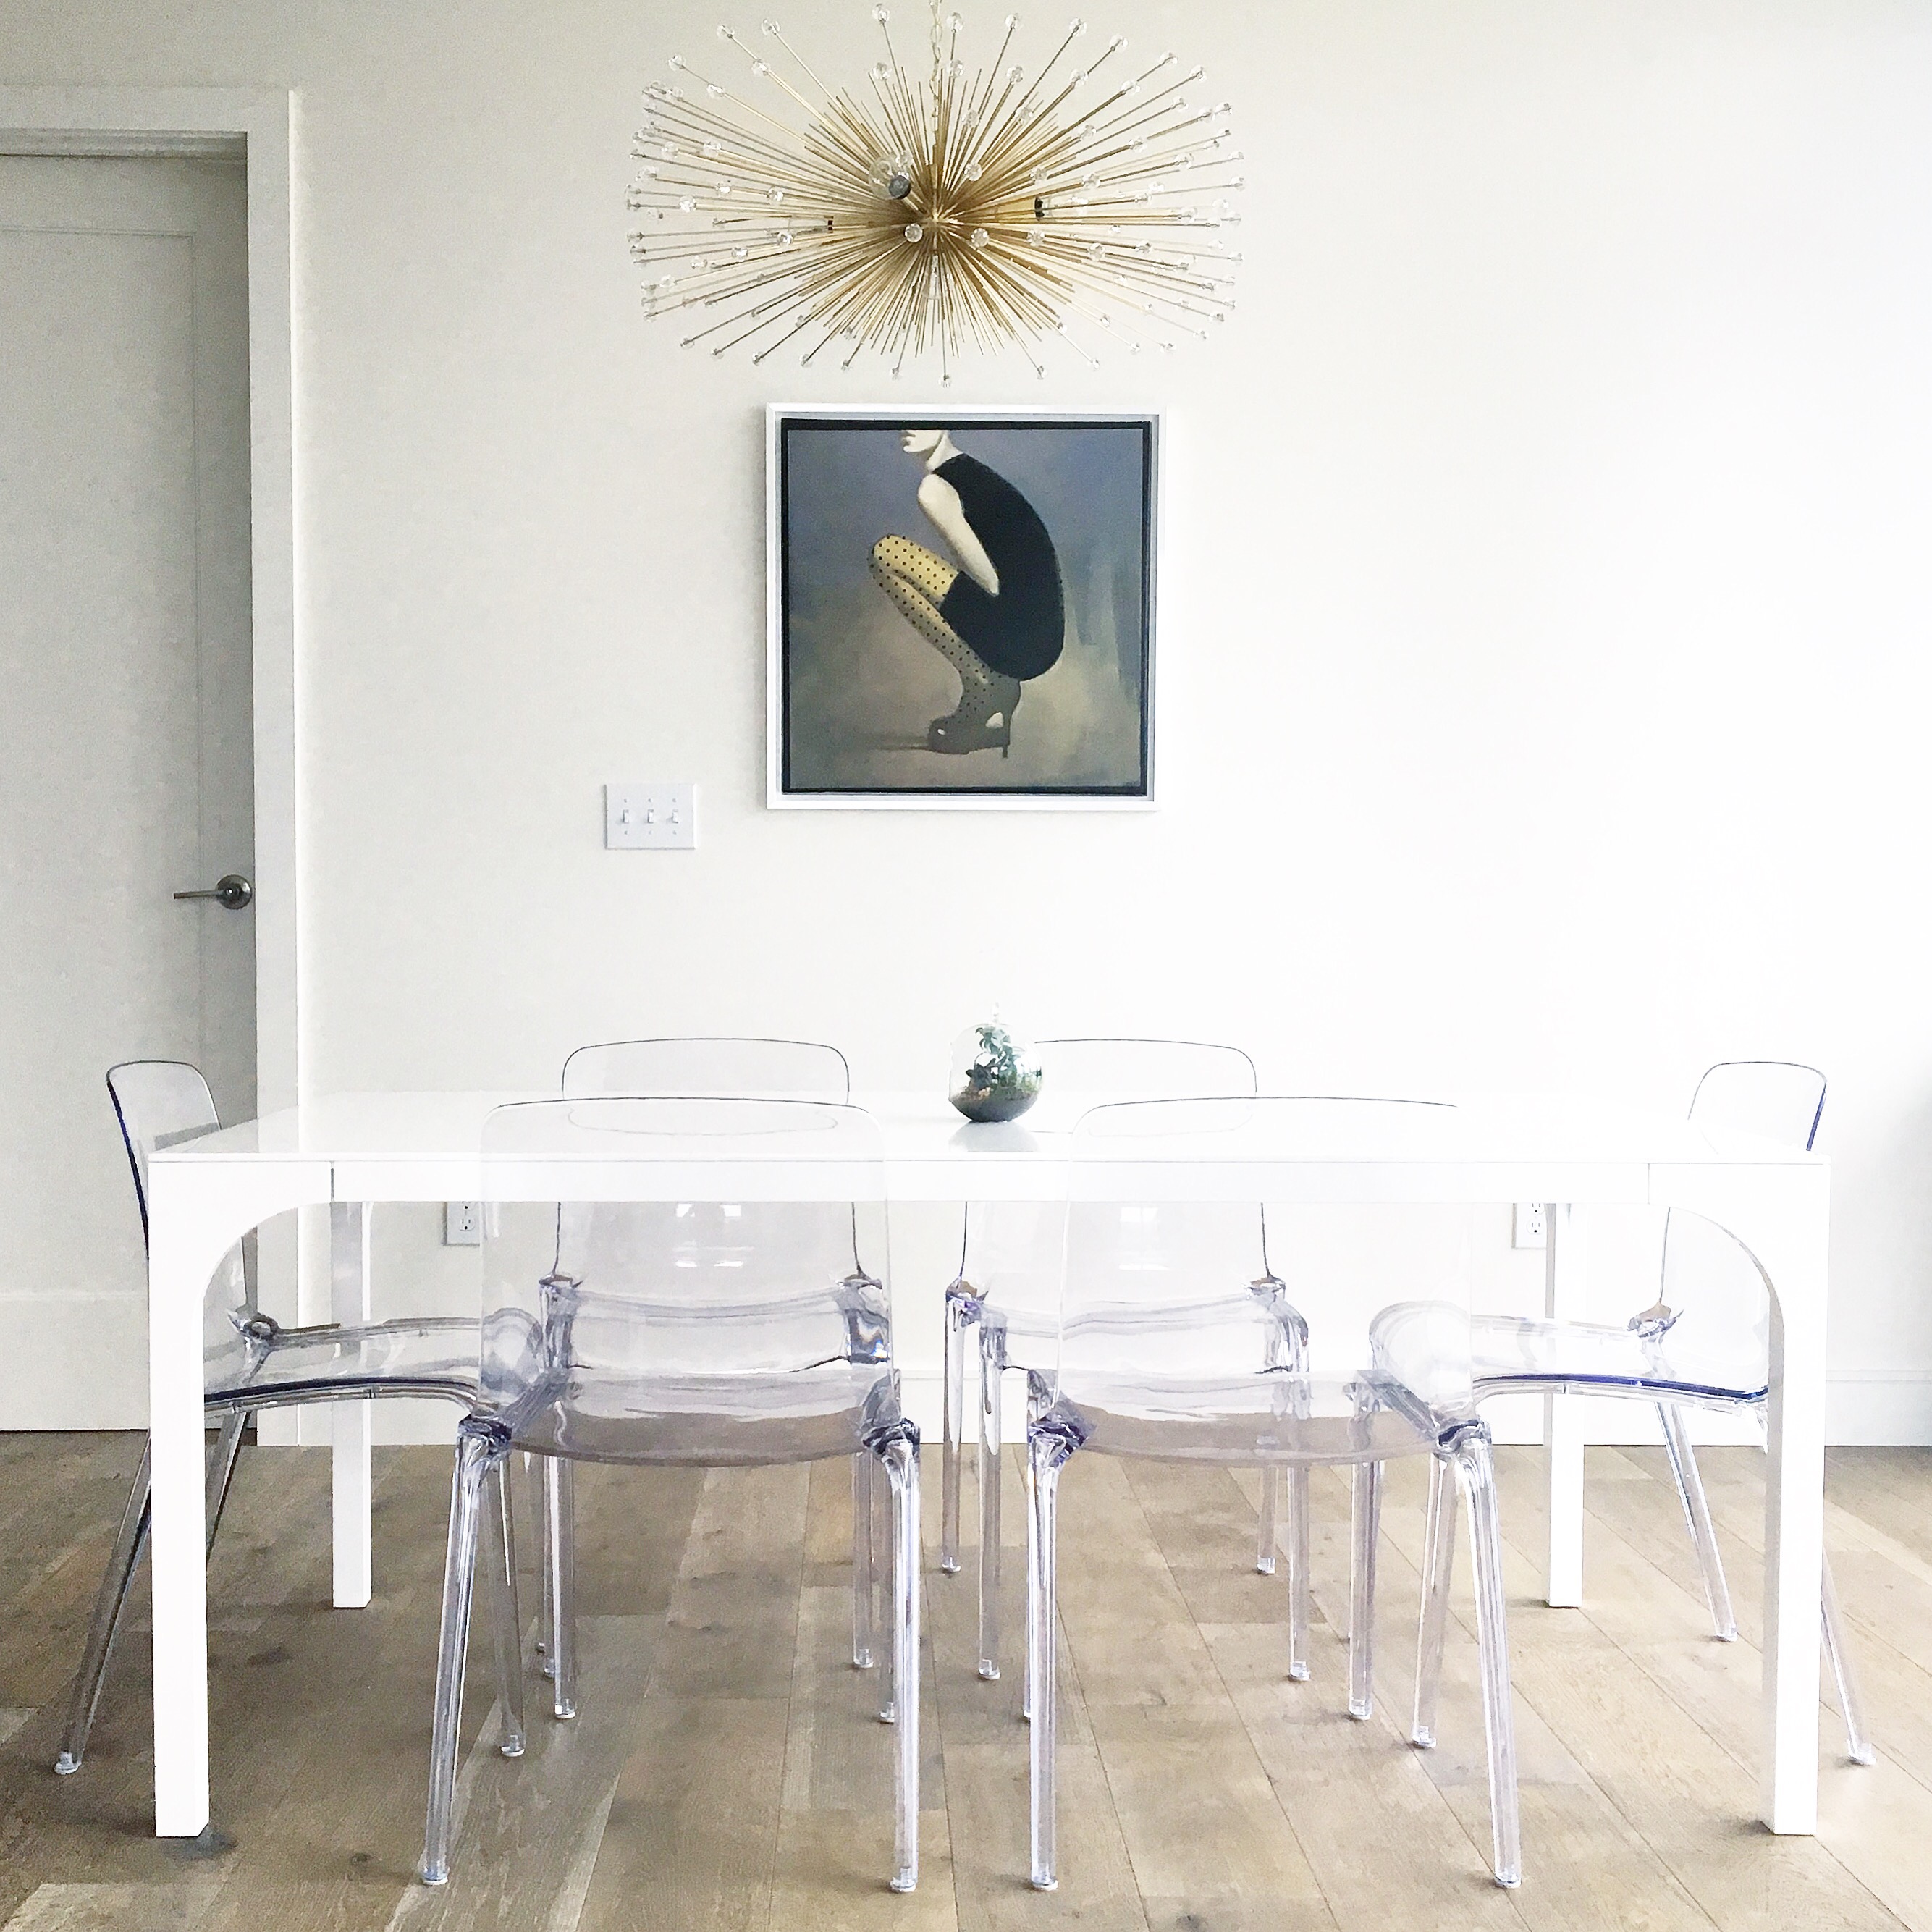 ghost-chairs-urchin-chandelier-lacquer-table-cb2-duttonbrown